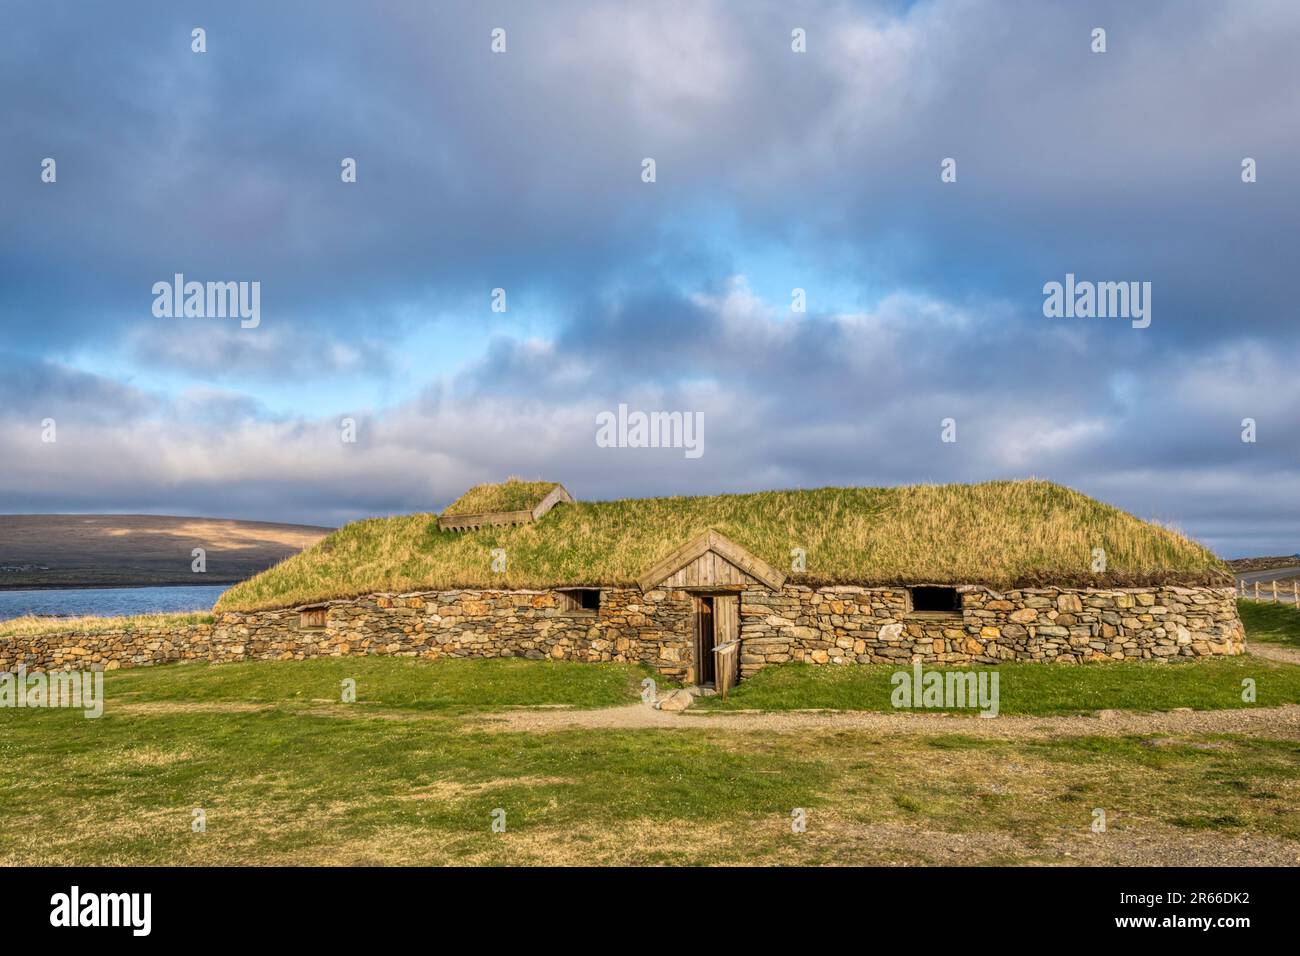 A reconstructed Viking longhouse at Brookpoint, Haroldswick on Unst, Shetland. Stock Photo